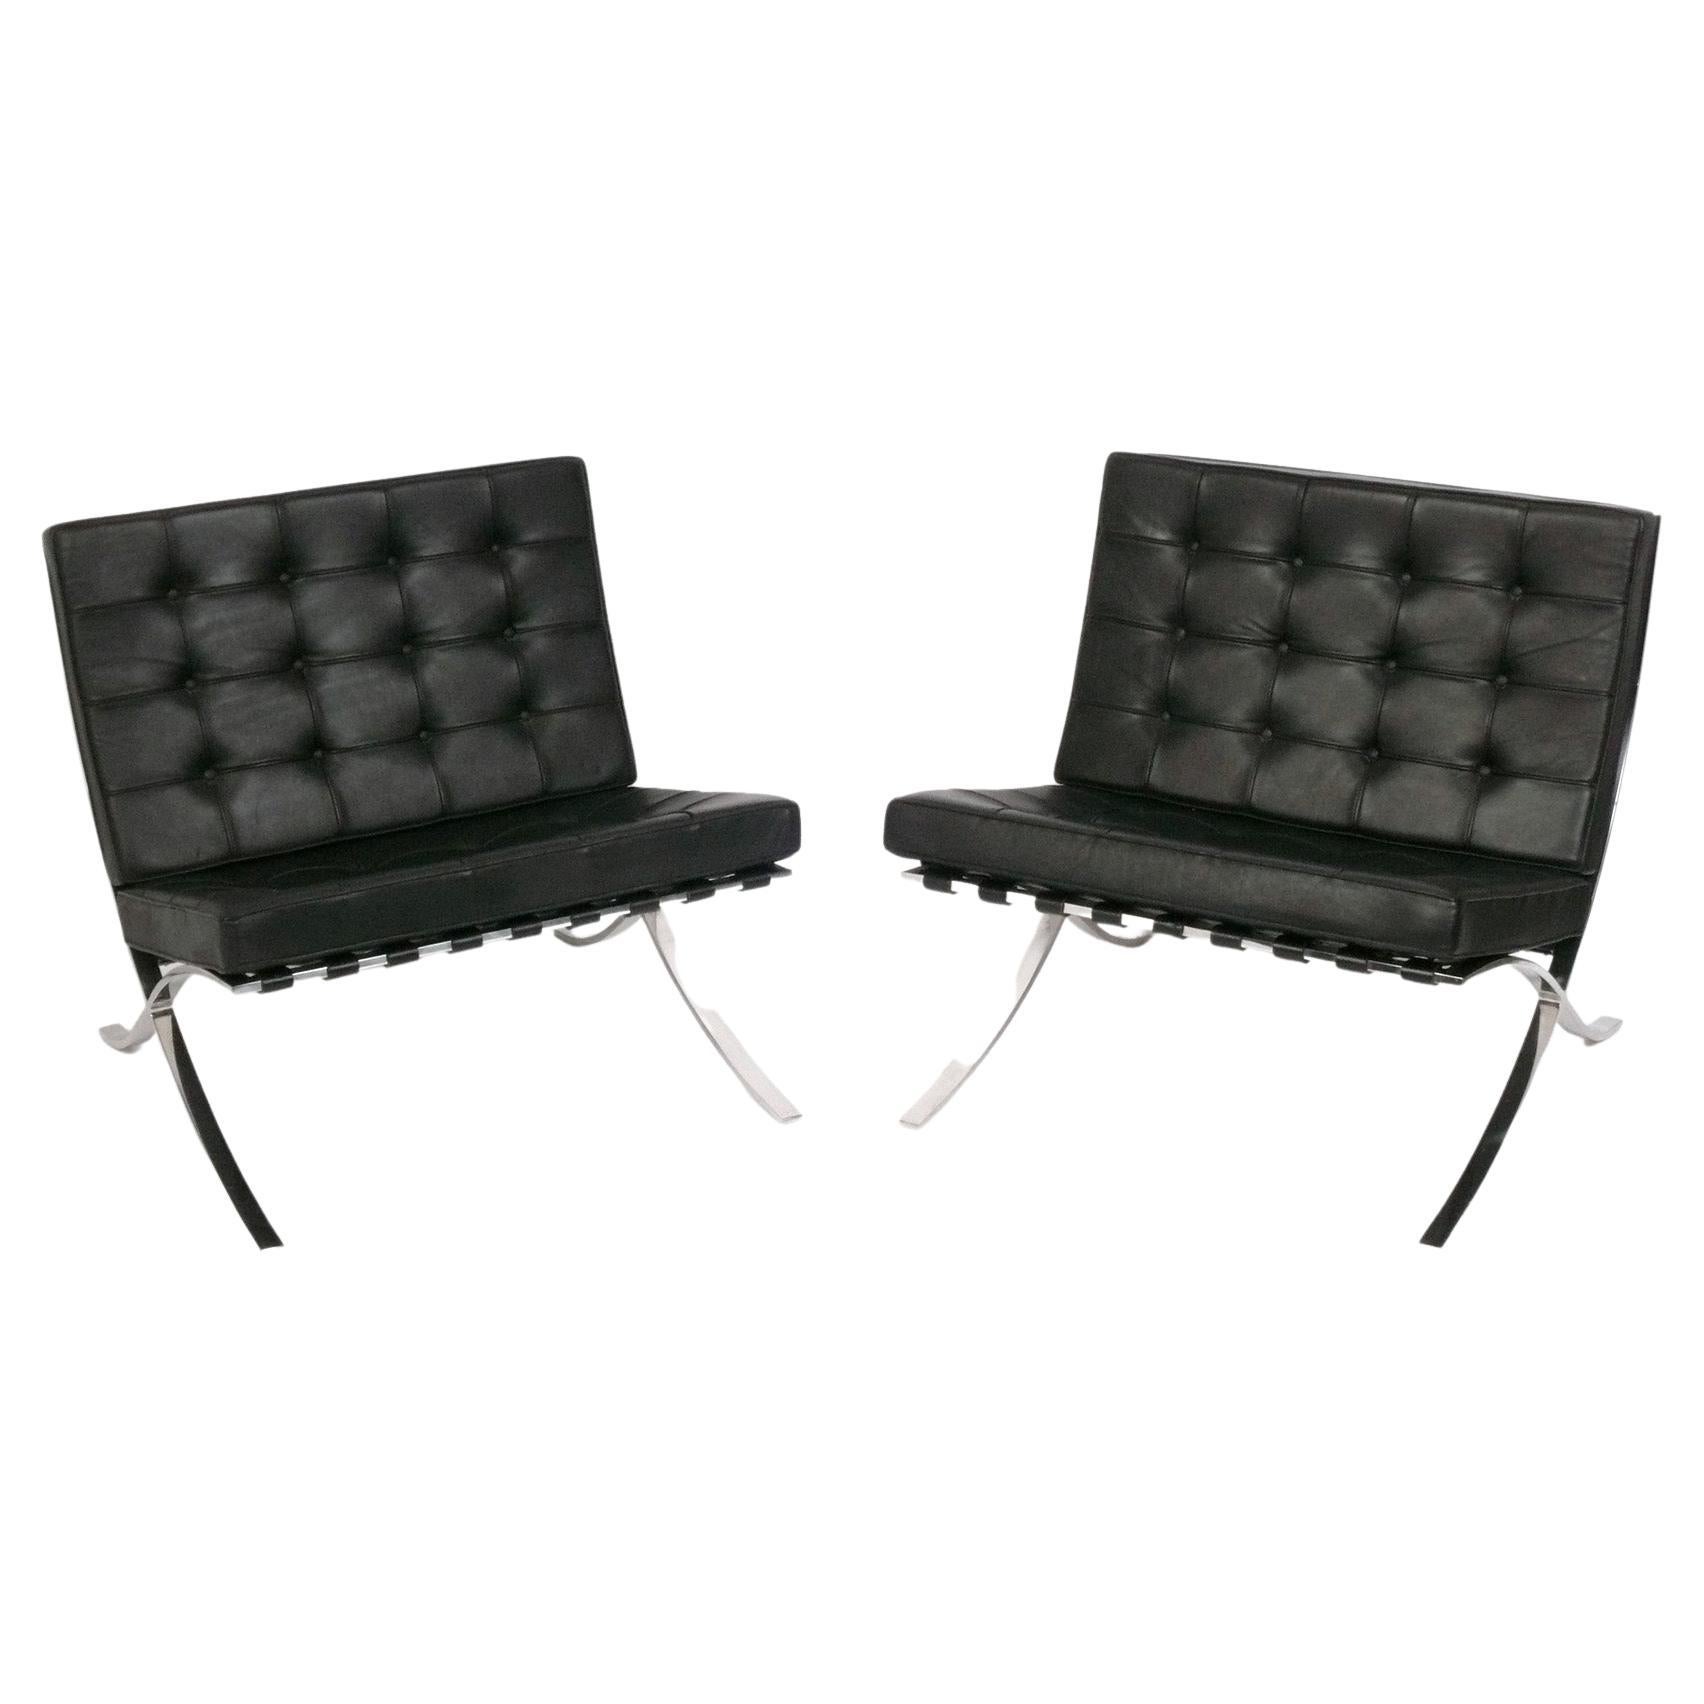 Mies van der Rohe for Knoll Barcelona Chairs circa 1979 Pair Available